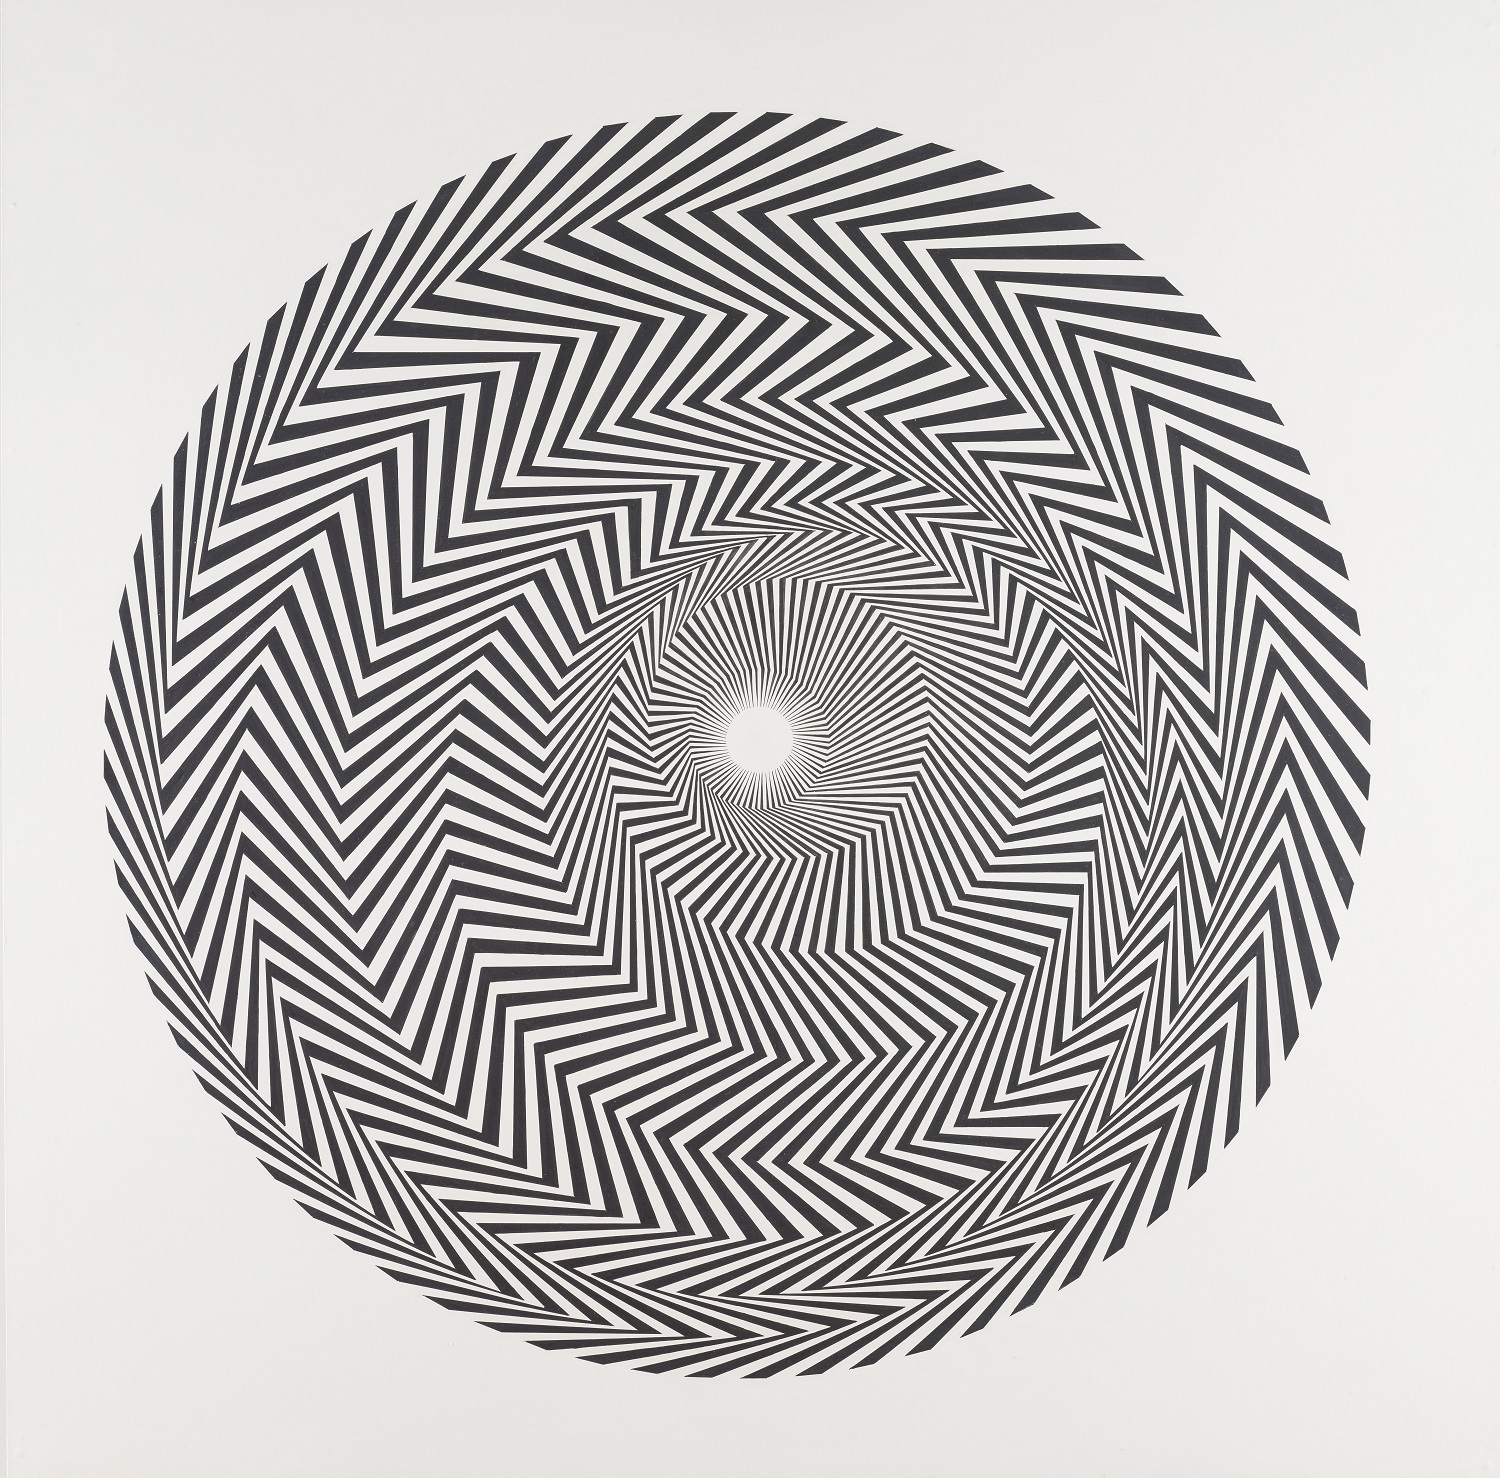 Bridget Riley Blaze 1, 1962 Private collection, on long loan to National Galleries of Scotland 2017 © Bridget Riley 2019. All rights reserved.  Photo © National Galleries of Scotland